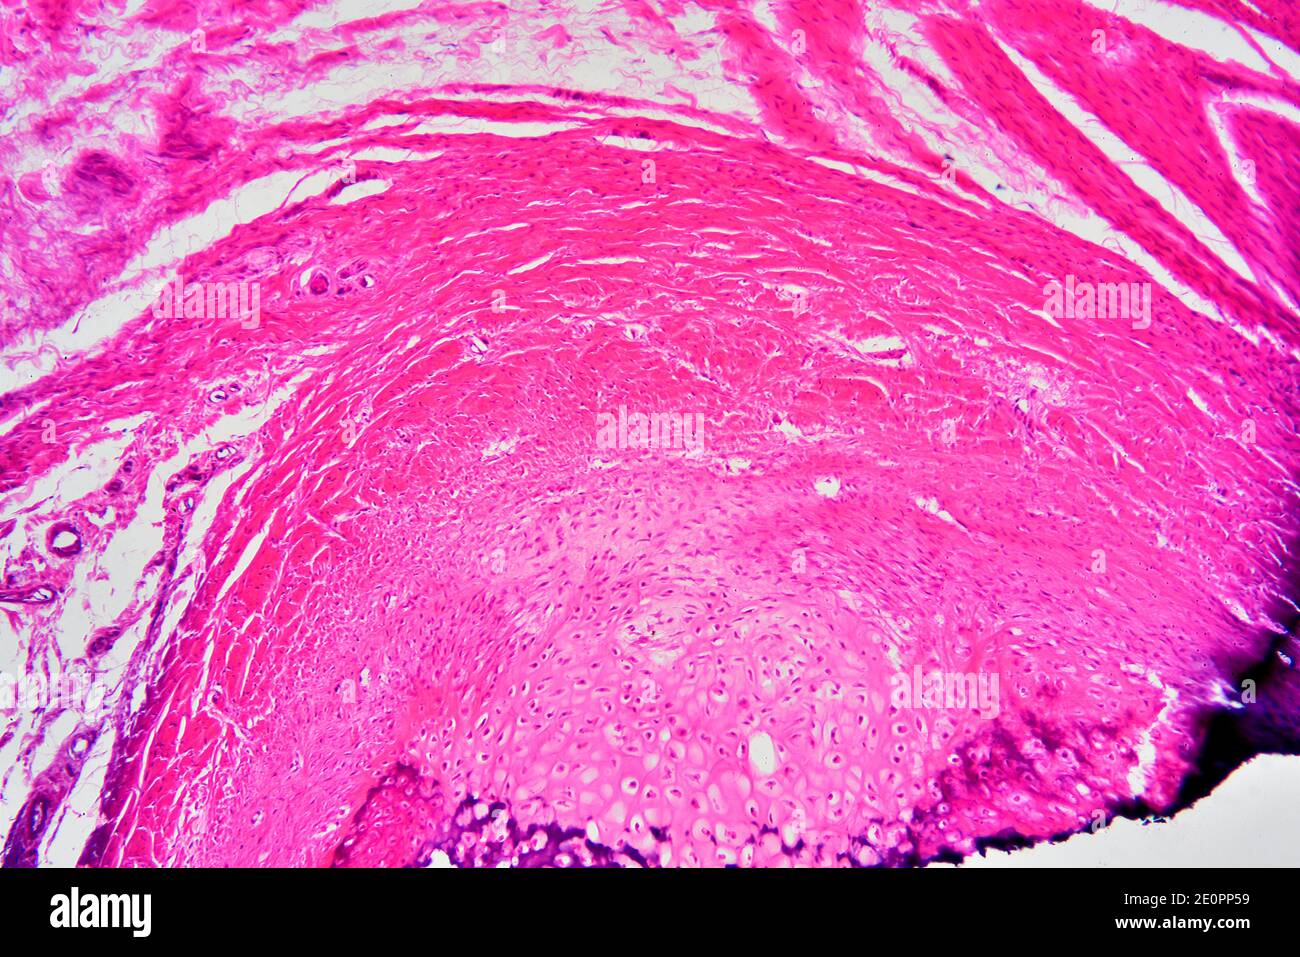 Developing infant bone. X75 at 10 cm wide. Stock Photo